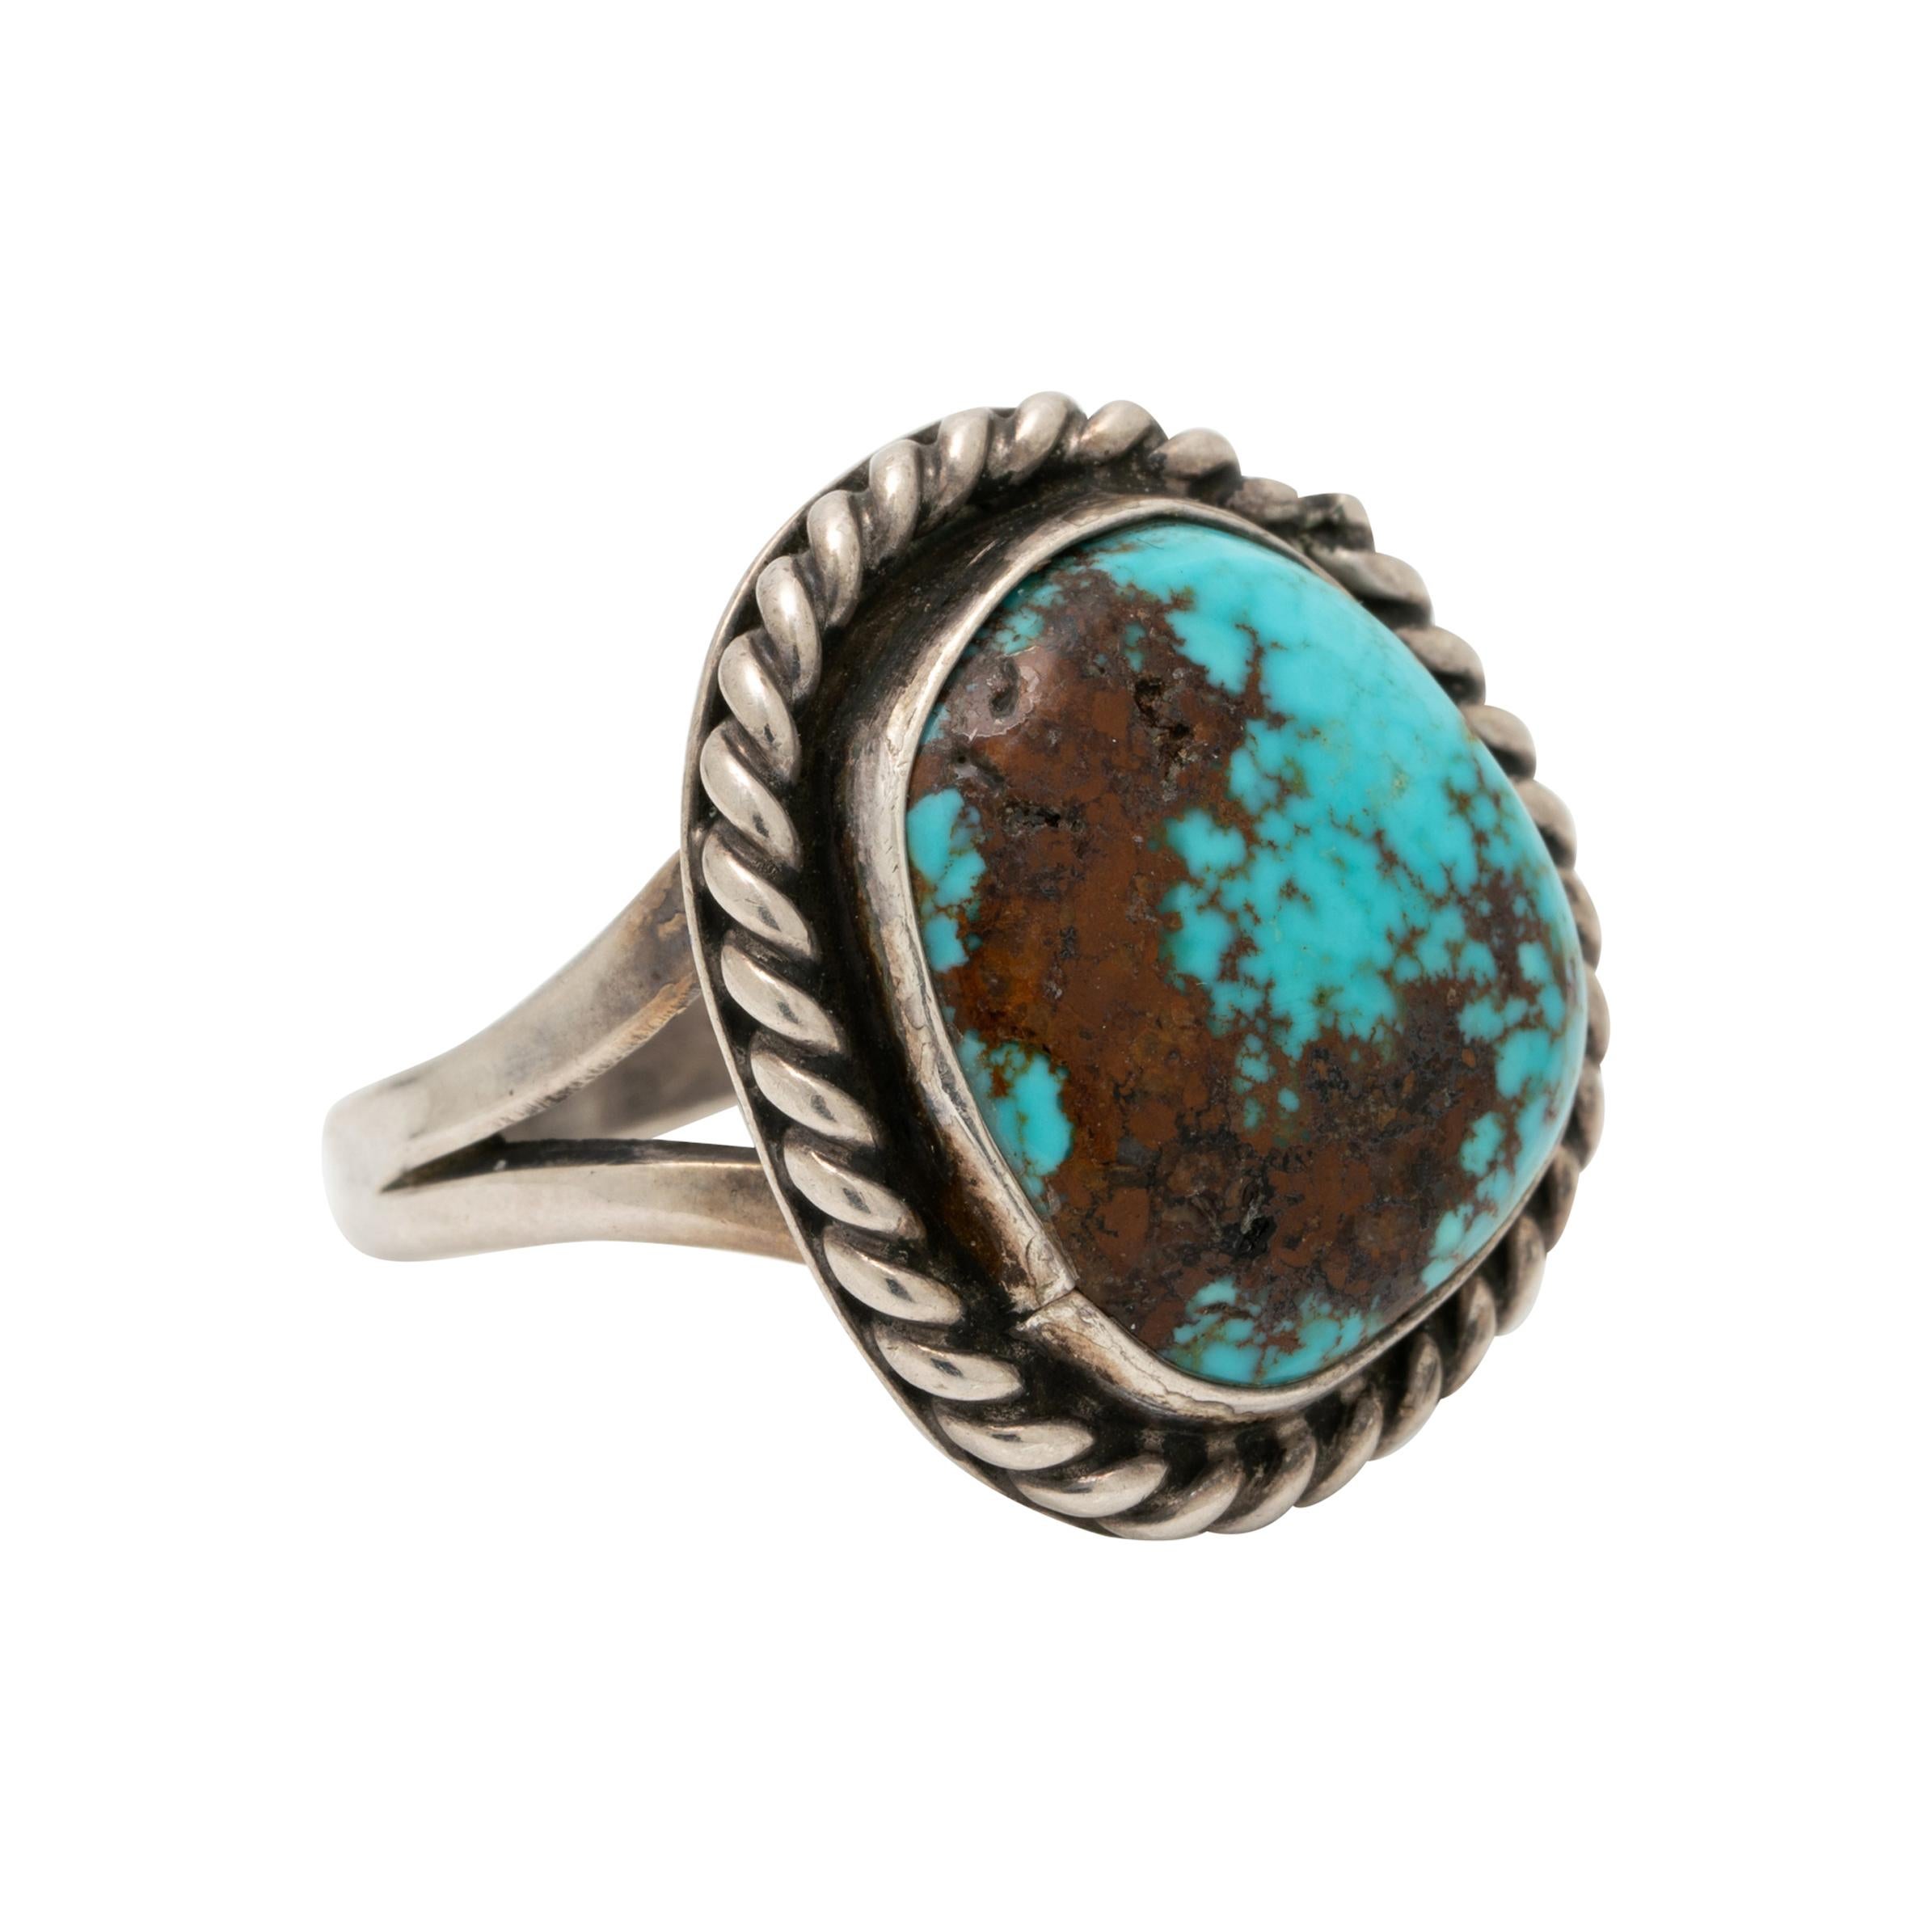 Vintage Navajo Native American Turquoise and Silver Rope Design Ring